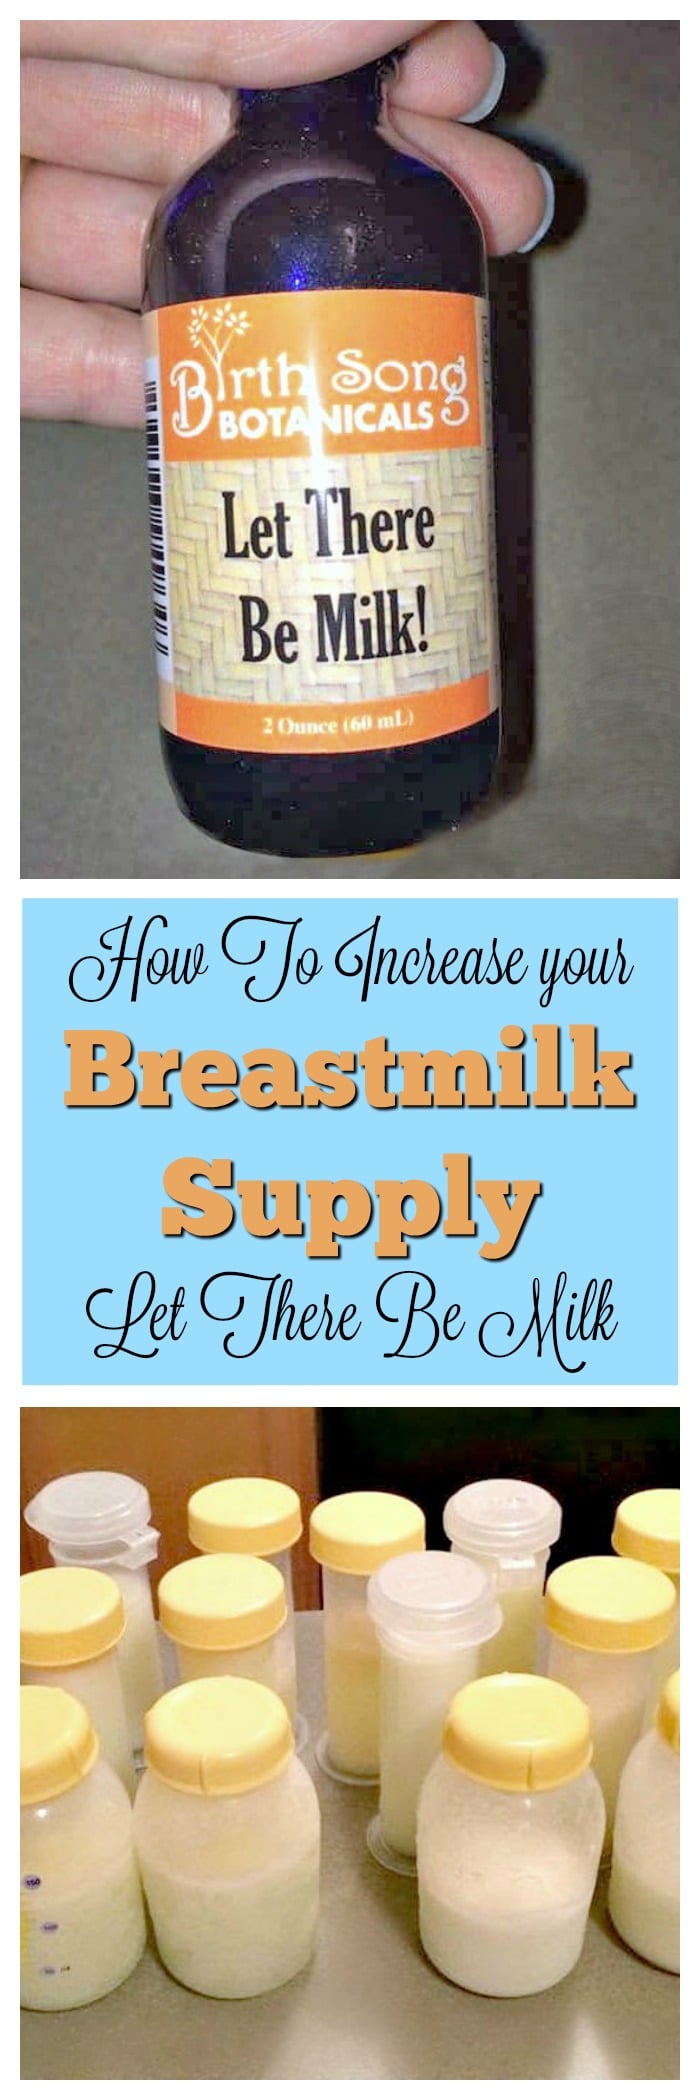 How to increase your breastmilk supply with Let there be milk, how to take let there be milk, let there be milk results, let there be milk review